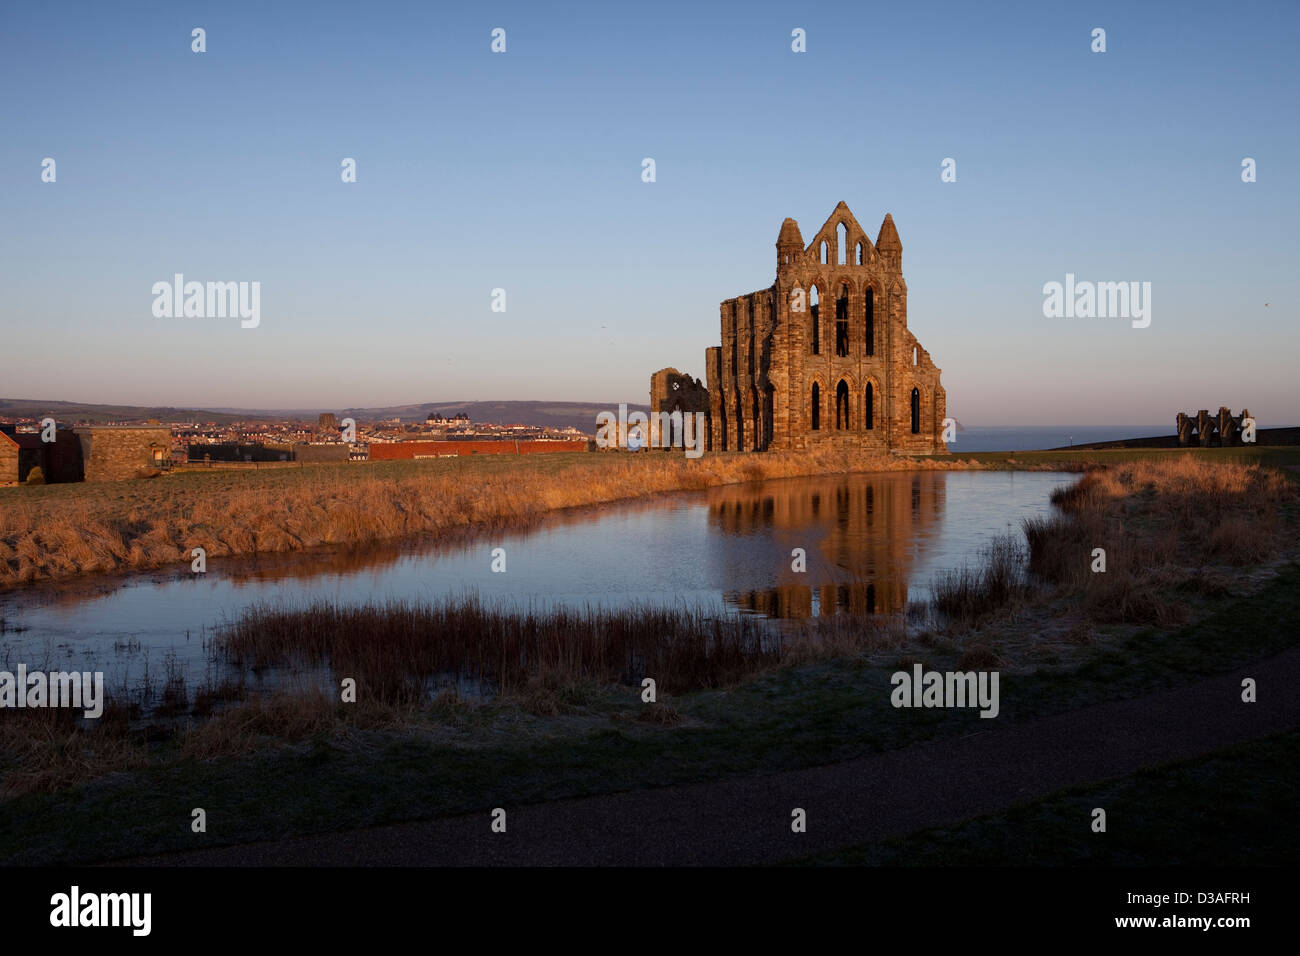 Whitby Abbey is a ruined Benedictine abbey overlooking the North Sea on the East Cliff above Whitby in North Yorkshire, England. Stock Photo